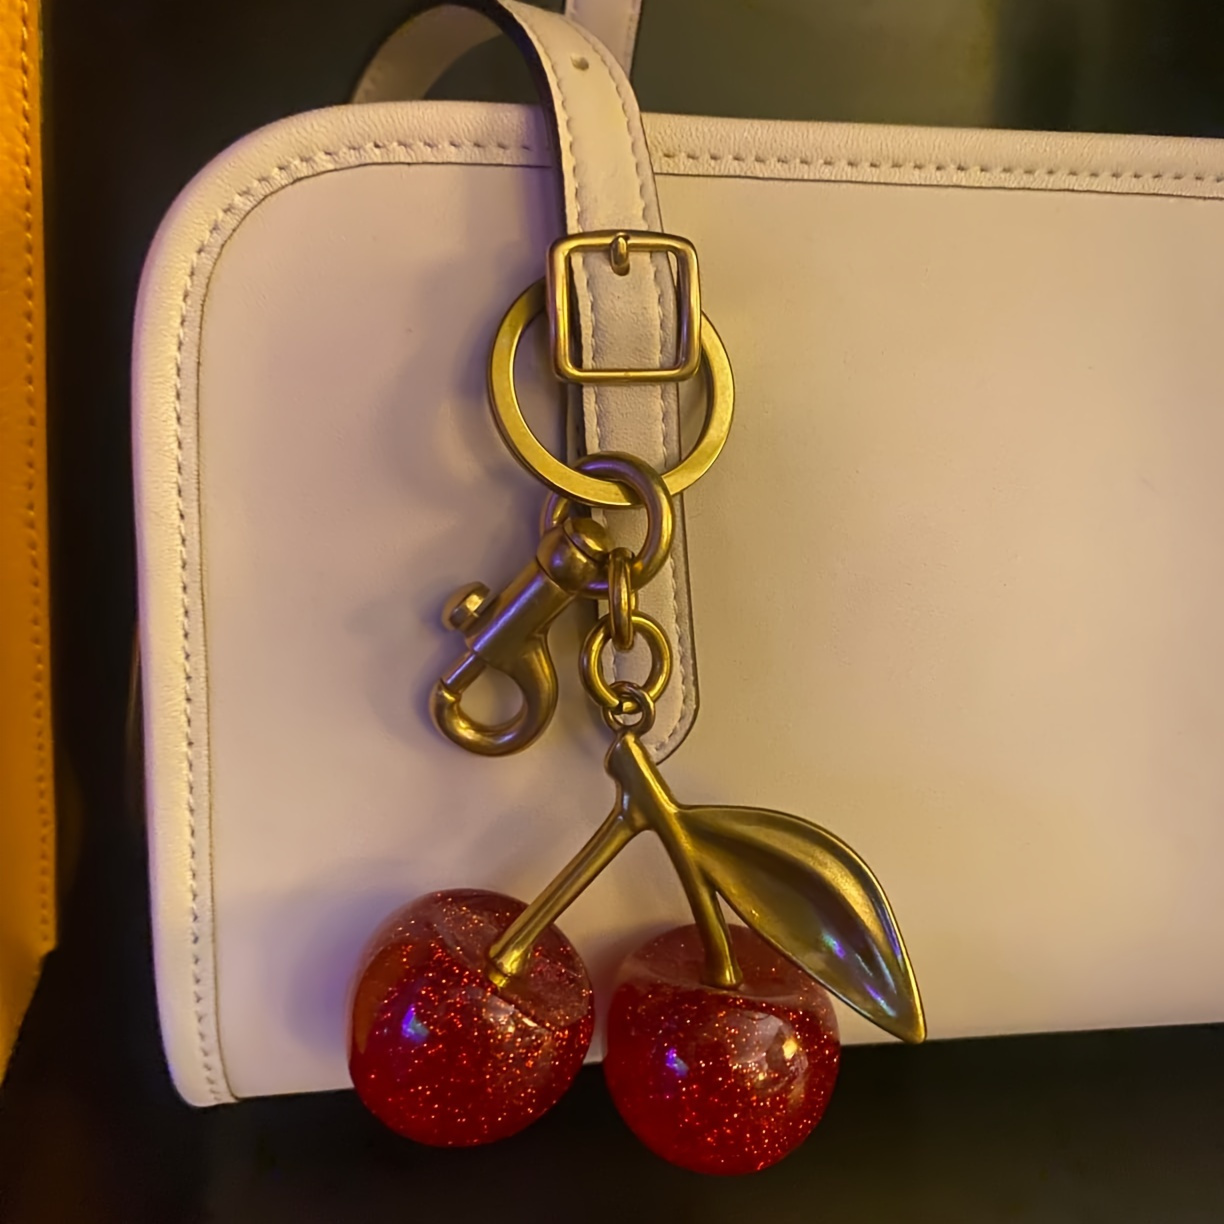 

Shiny And Cute Cherry Charm Key Chain Bag Charm For Hanging On Bags And Handbags